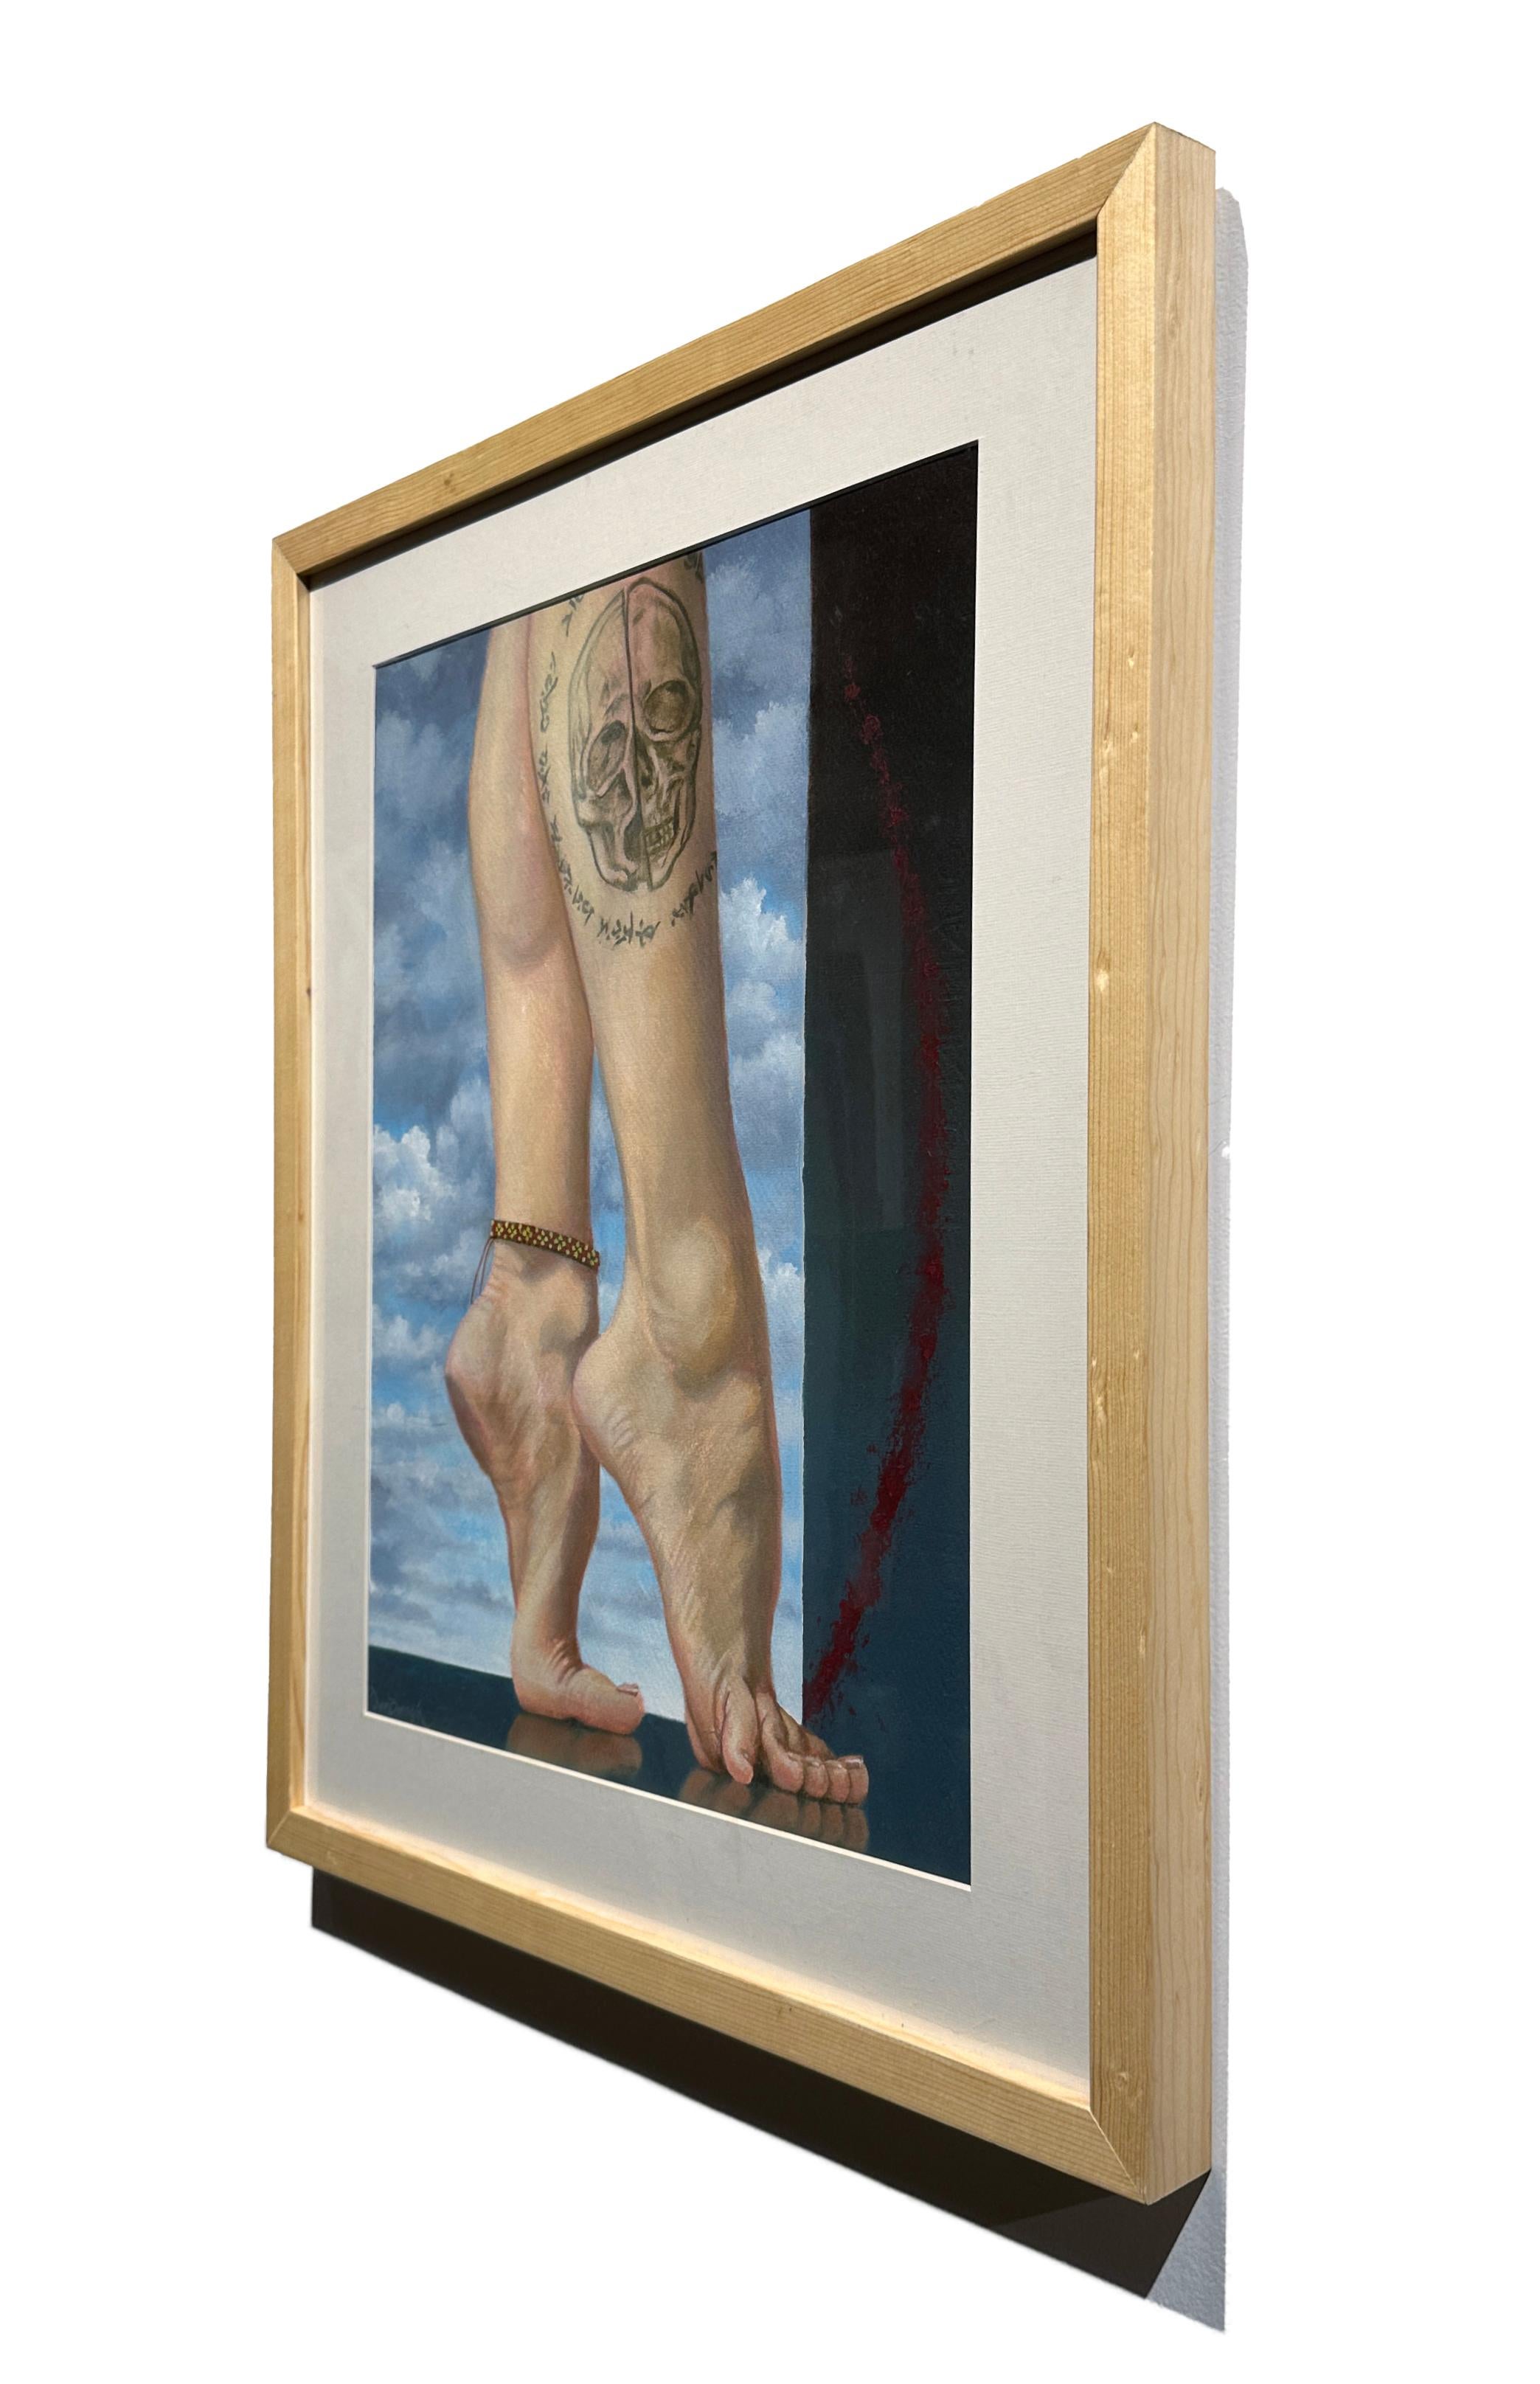 Exegesis - Dancer's Legs Emblazoned with a Skull Tattoo, Oil & Acrylic on Paper - Contemporary Painting by Juan Barragán